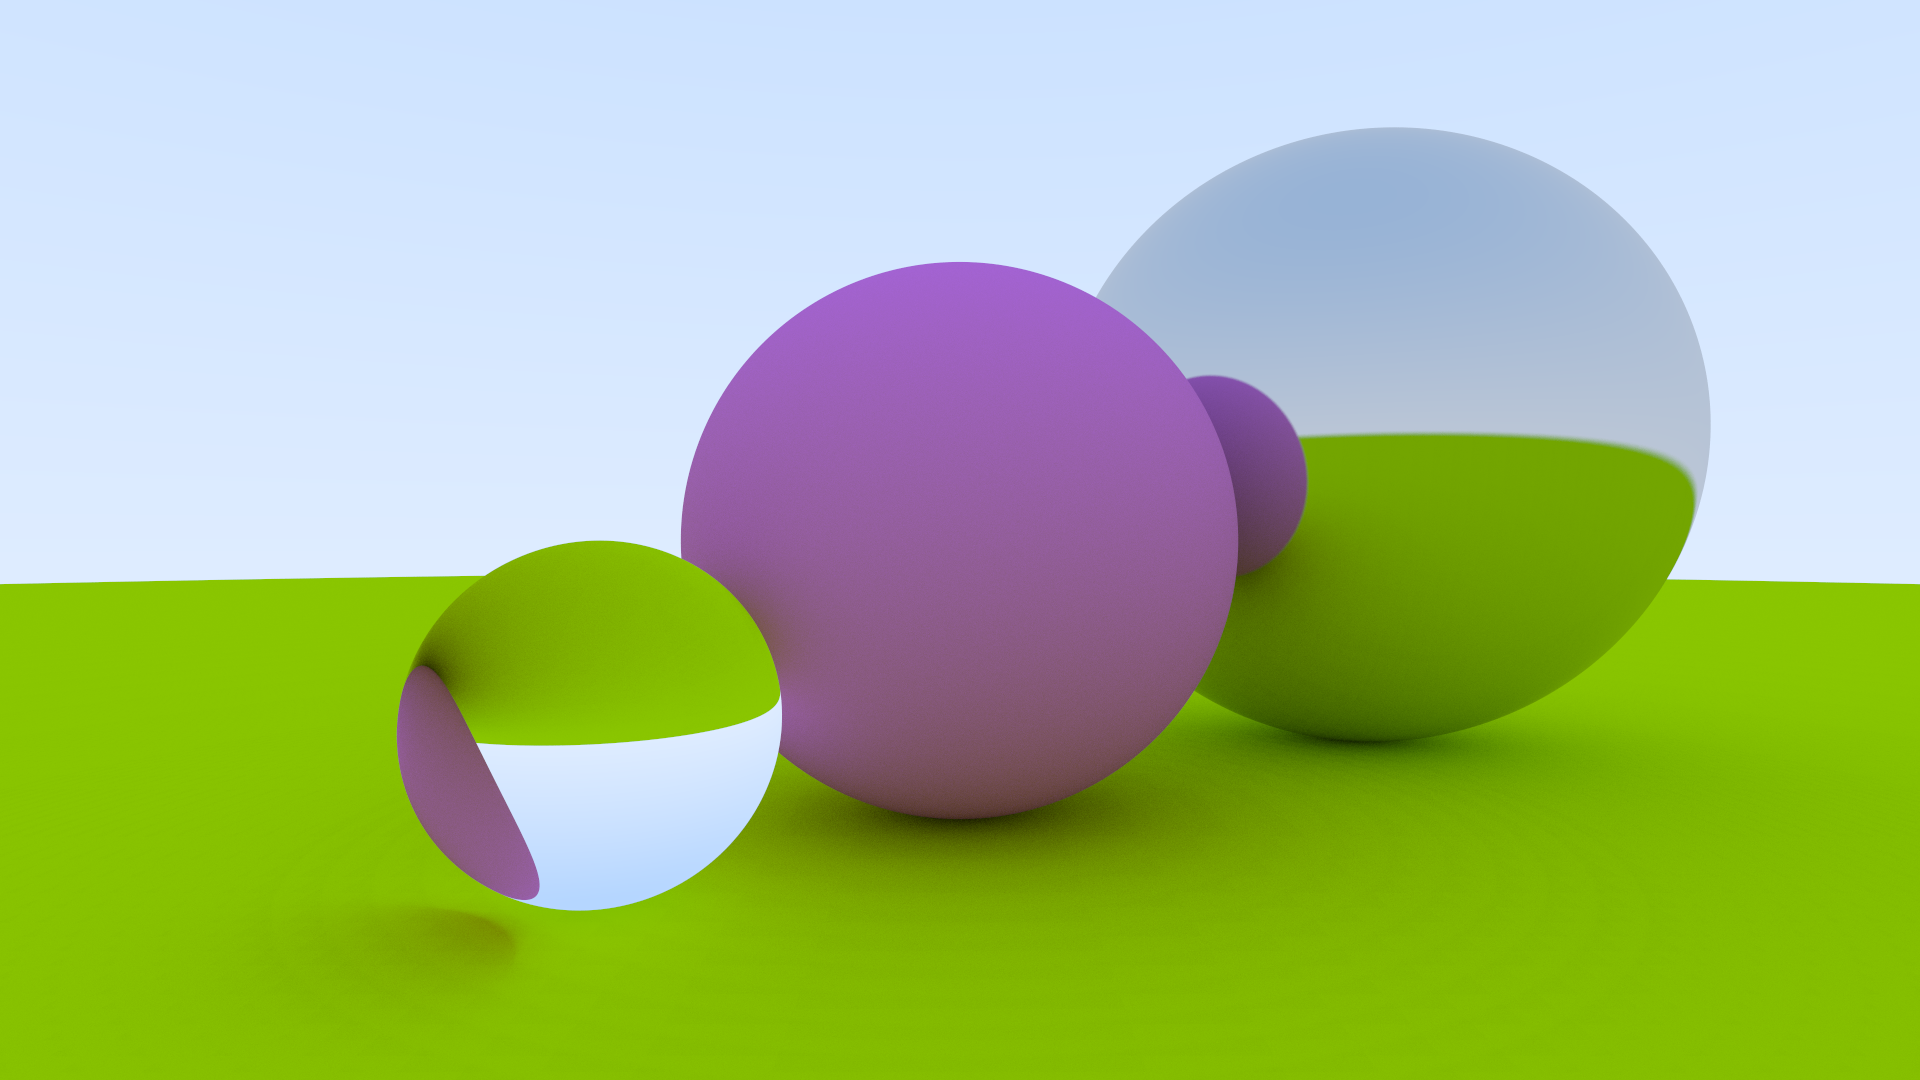 Demo of raytracer